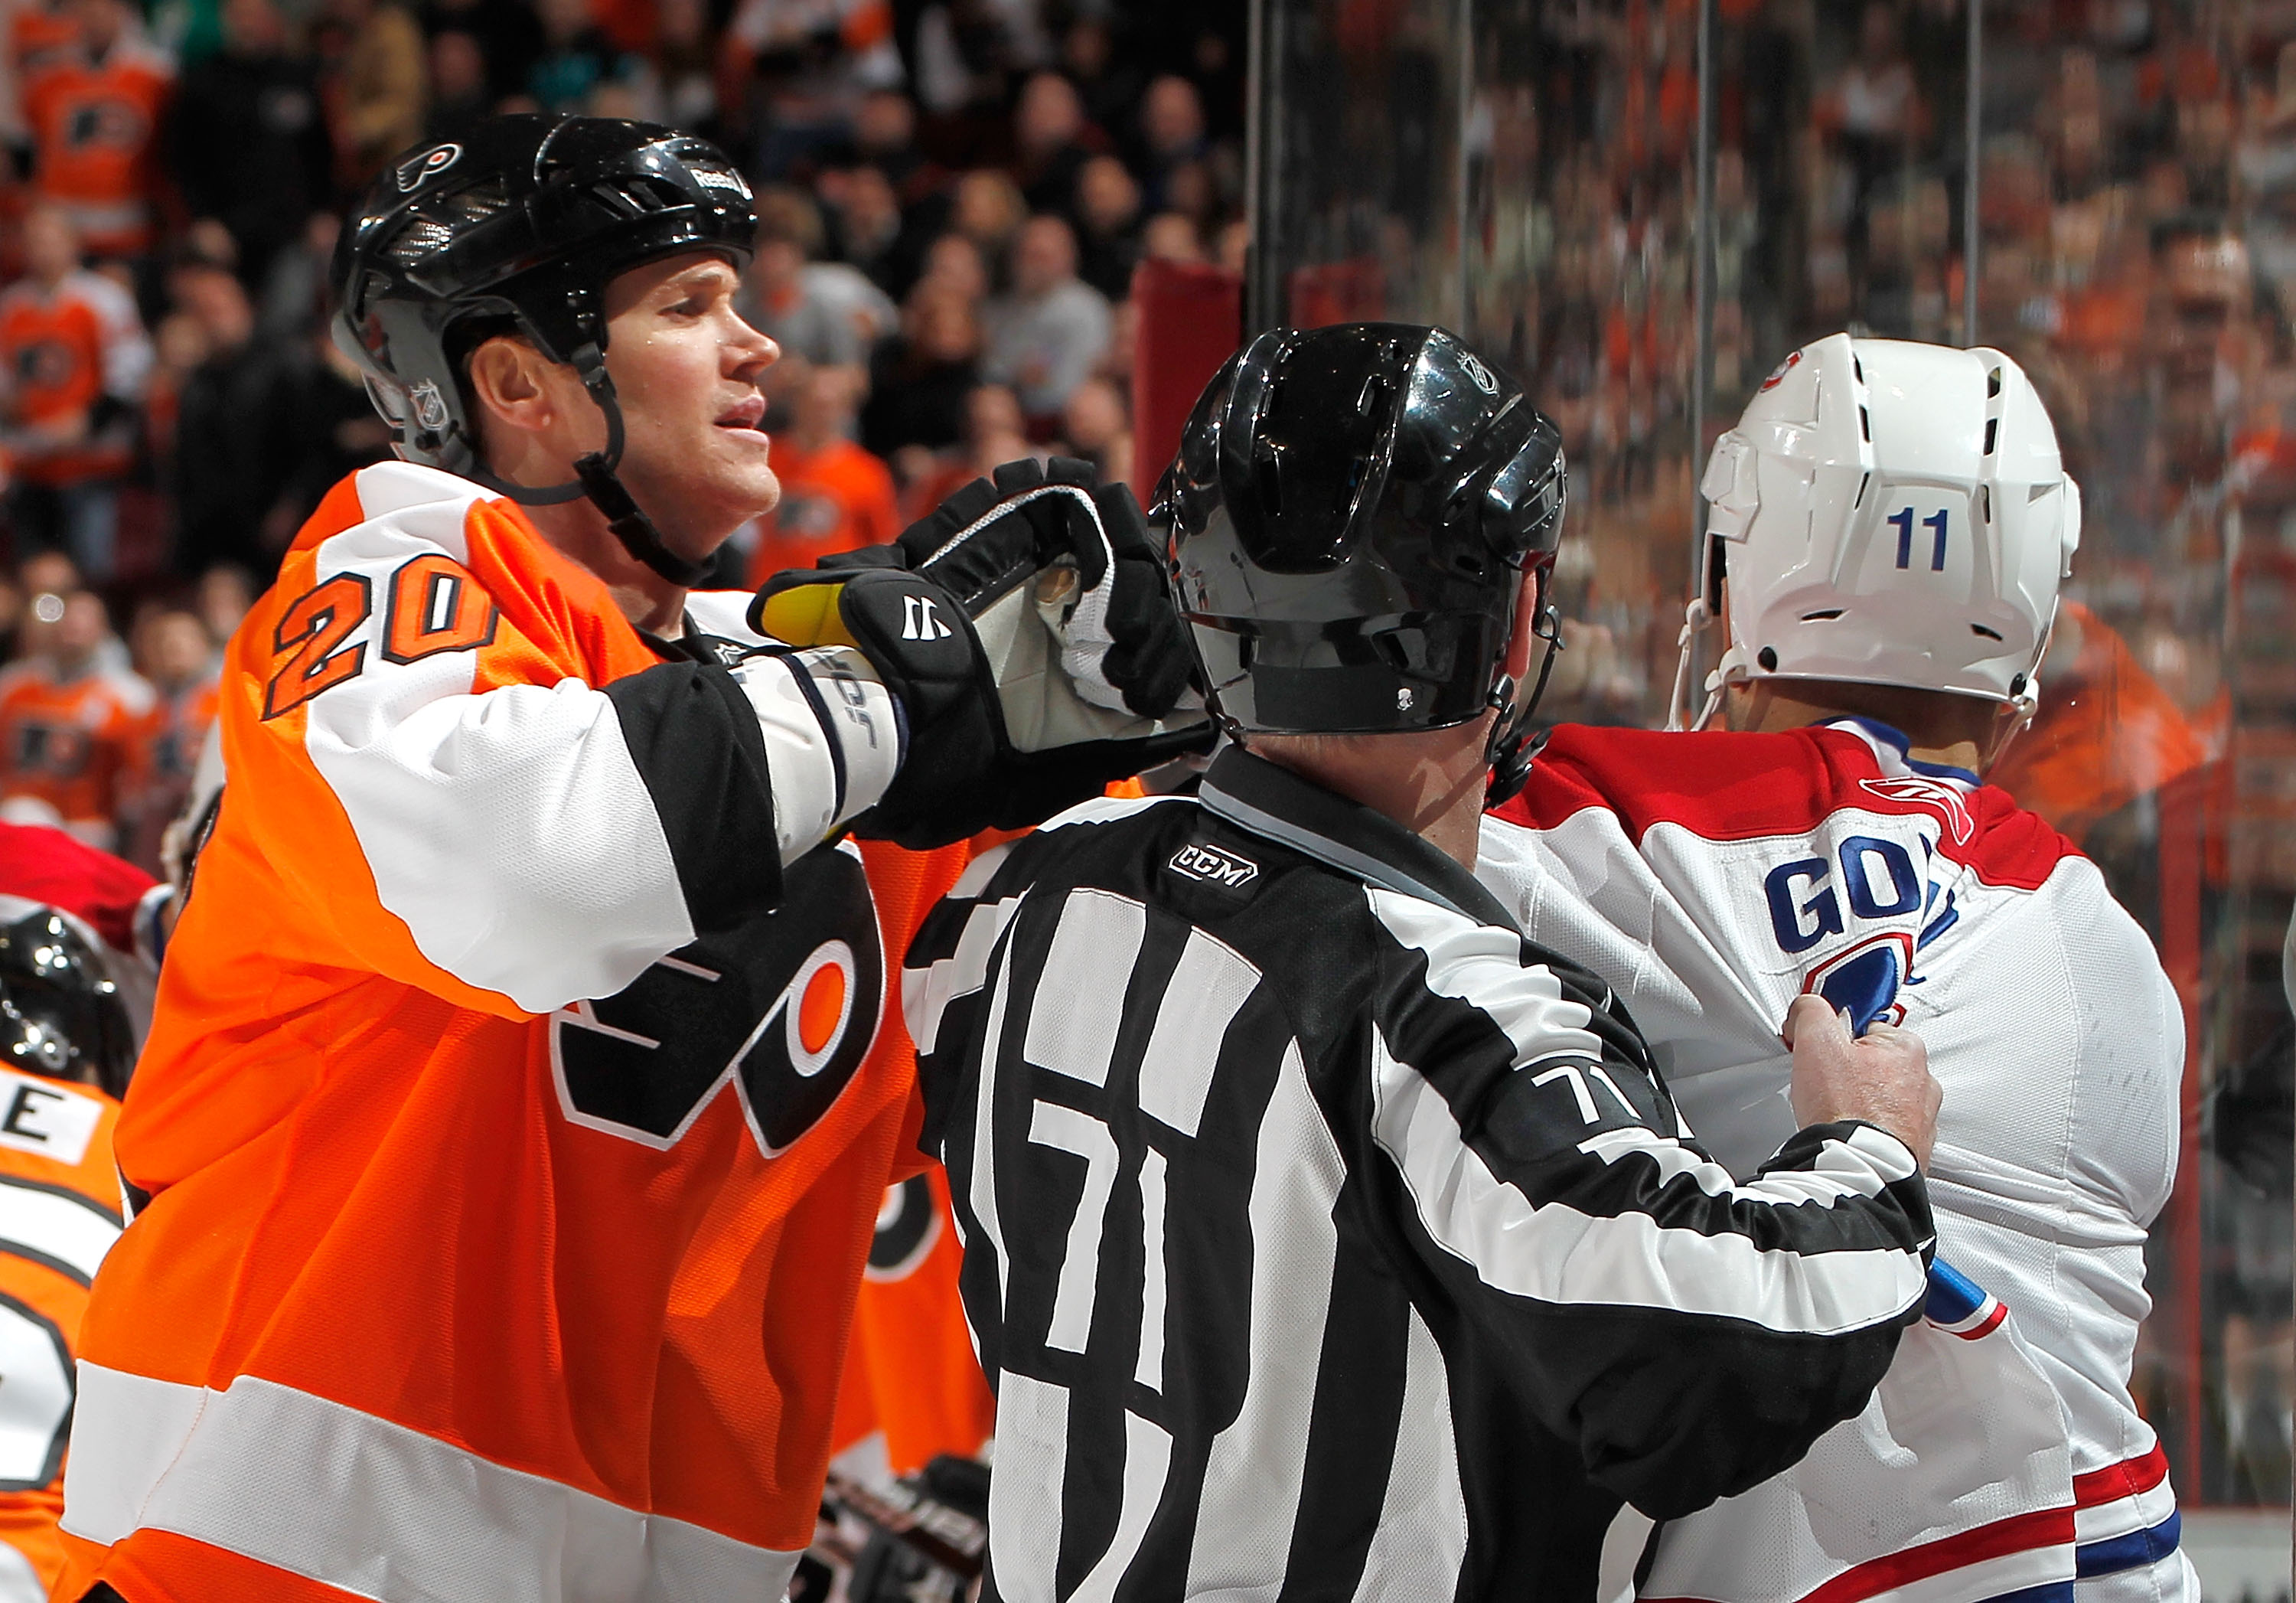 NHL: Chris Pronger and the Greatest Leaders in Philadelphia Flyers